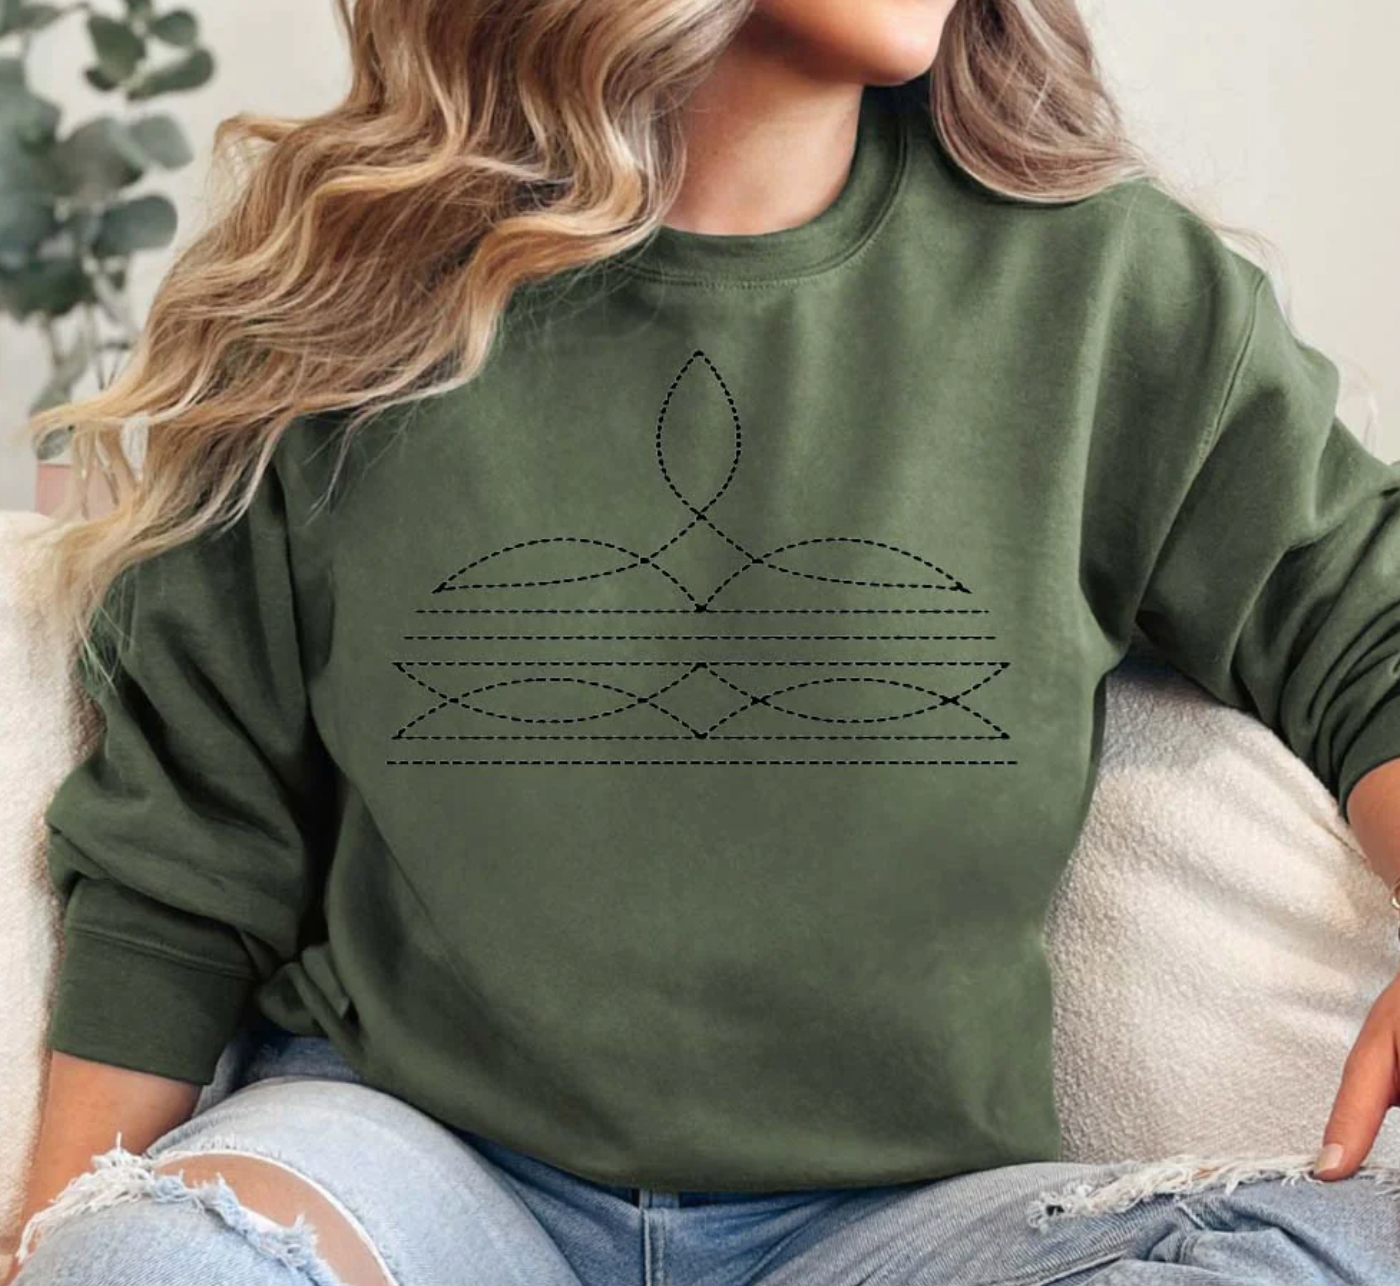 Western Boot Stitch Tee/Sweatshirt -Multiple Color Options: Large / White Tee